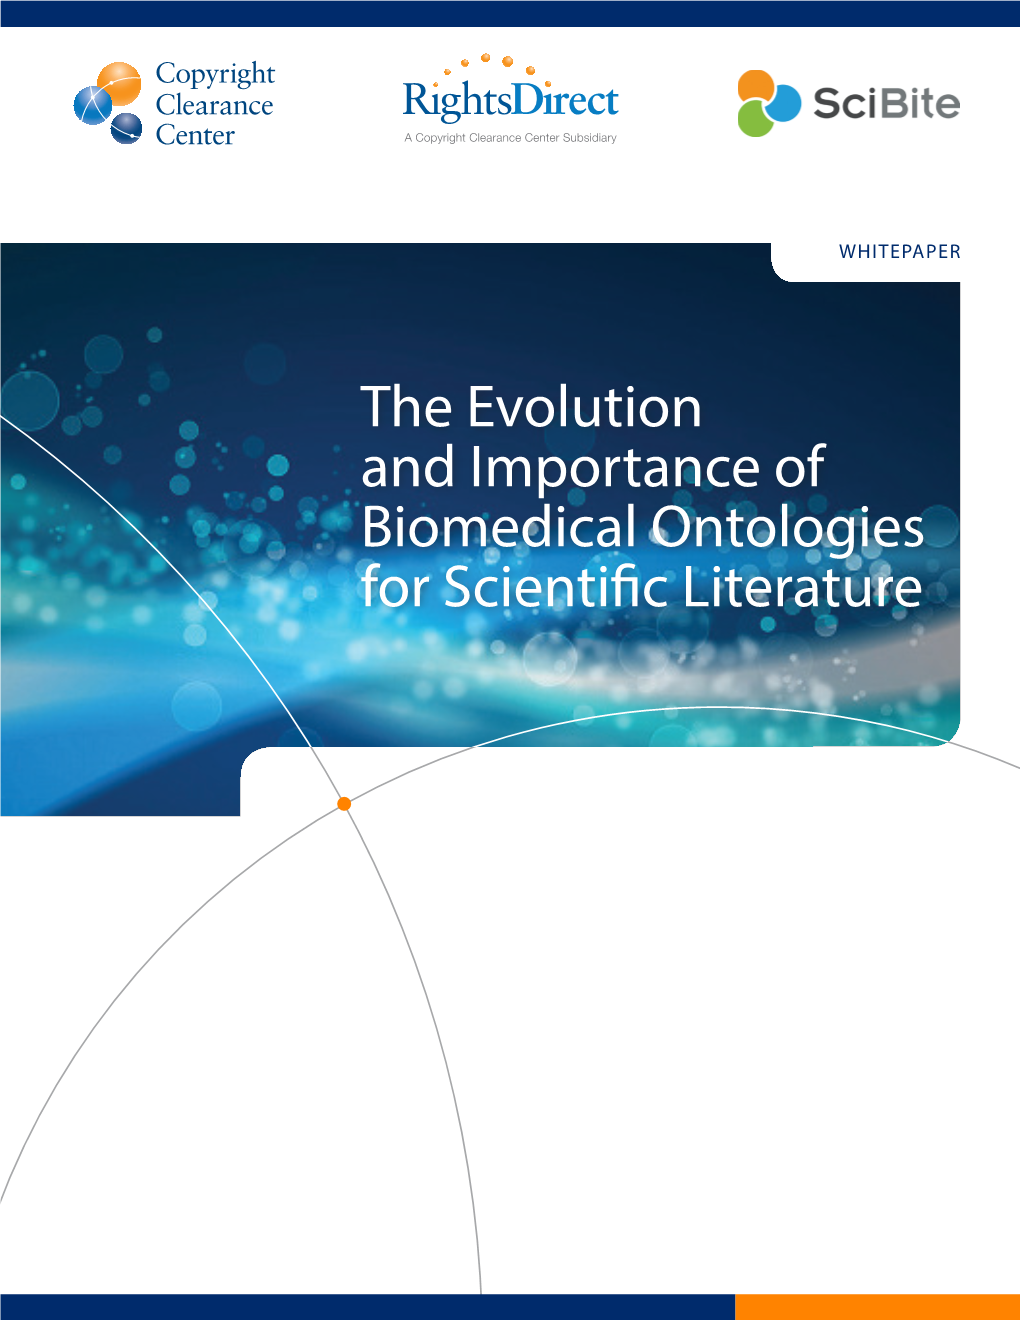 The Evolution and Importance of Biomedical Ontologies for Scientific